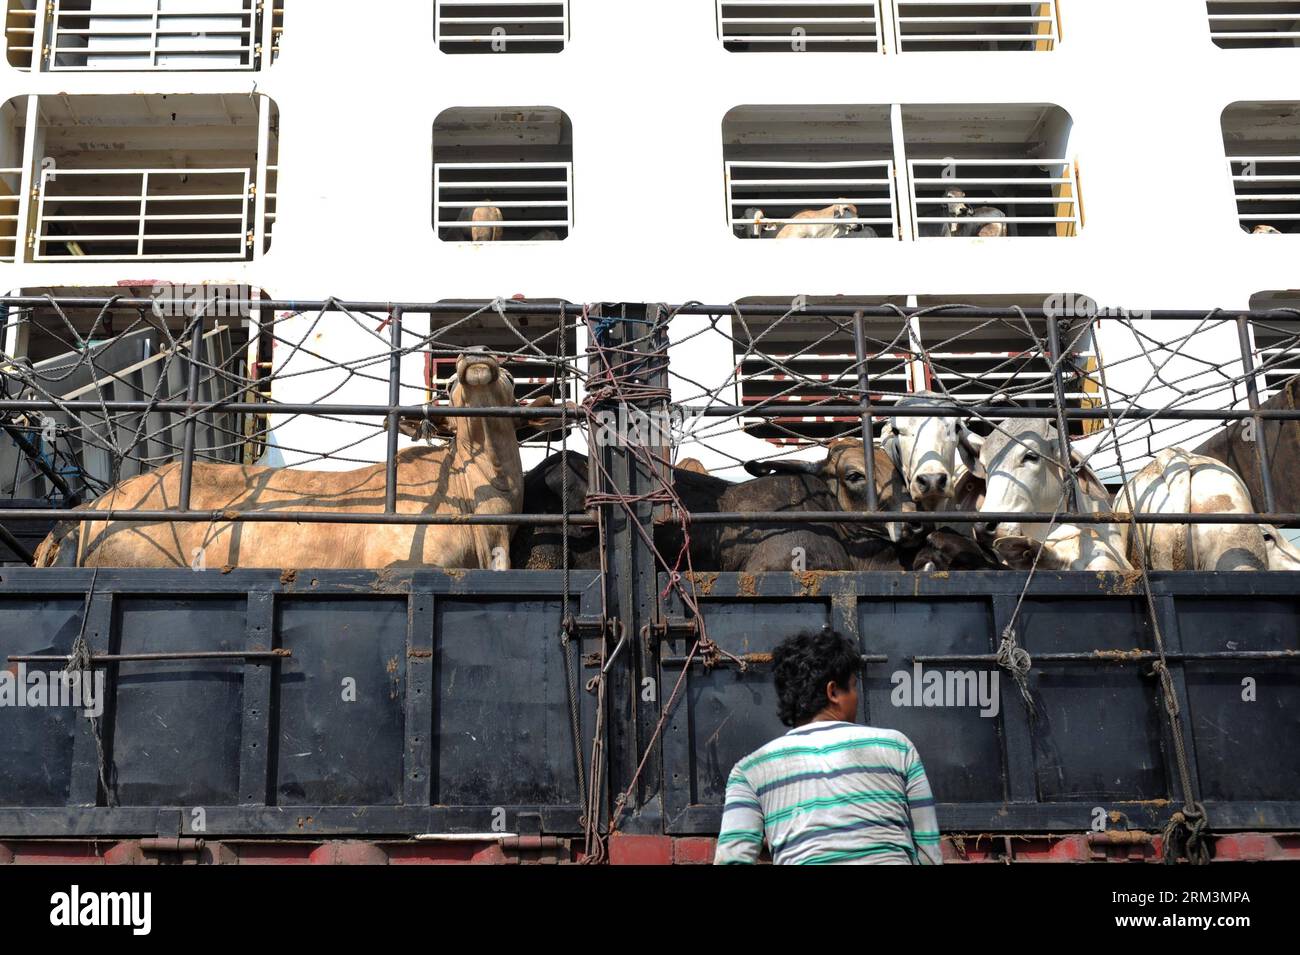 Bildnummer: 60240483  Datum: 29.07.2013  Copyright: imago/Xinhua (130729) -- JAKARTA, July 29, 2013 (Xinhua) -- Cattle imported from Australia are seen unloaded at the Tanjung Priok Port in Jakarta, Indonesia, July 29, 2013. More than 7,000 head of cattle imported from Australia were unloaded on Monday. Indonesian government plan to increase imports of cattle ready for slaughter to bring down prices of beef in Indonesia. (Xinhua/Veri Sanovri) (djj) INDONESIA-JAKARTA-CATTLE-IMPORT PUBLICATIONxNOTxINxCHN Wirtschaft Viehzucht Viehtransport Rinder Tier Rinderzucht x0x xdd premiumd 2013 quer      6 Stock Photo